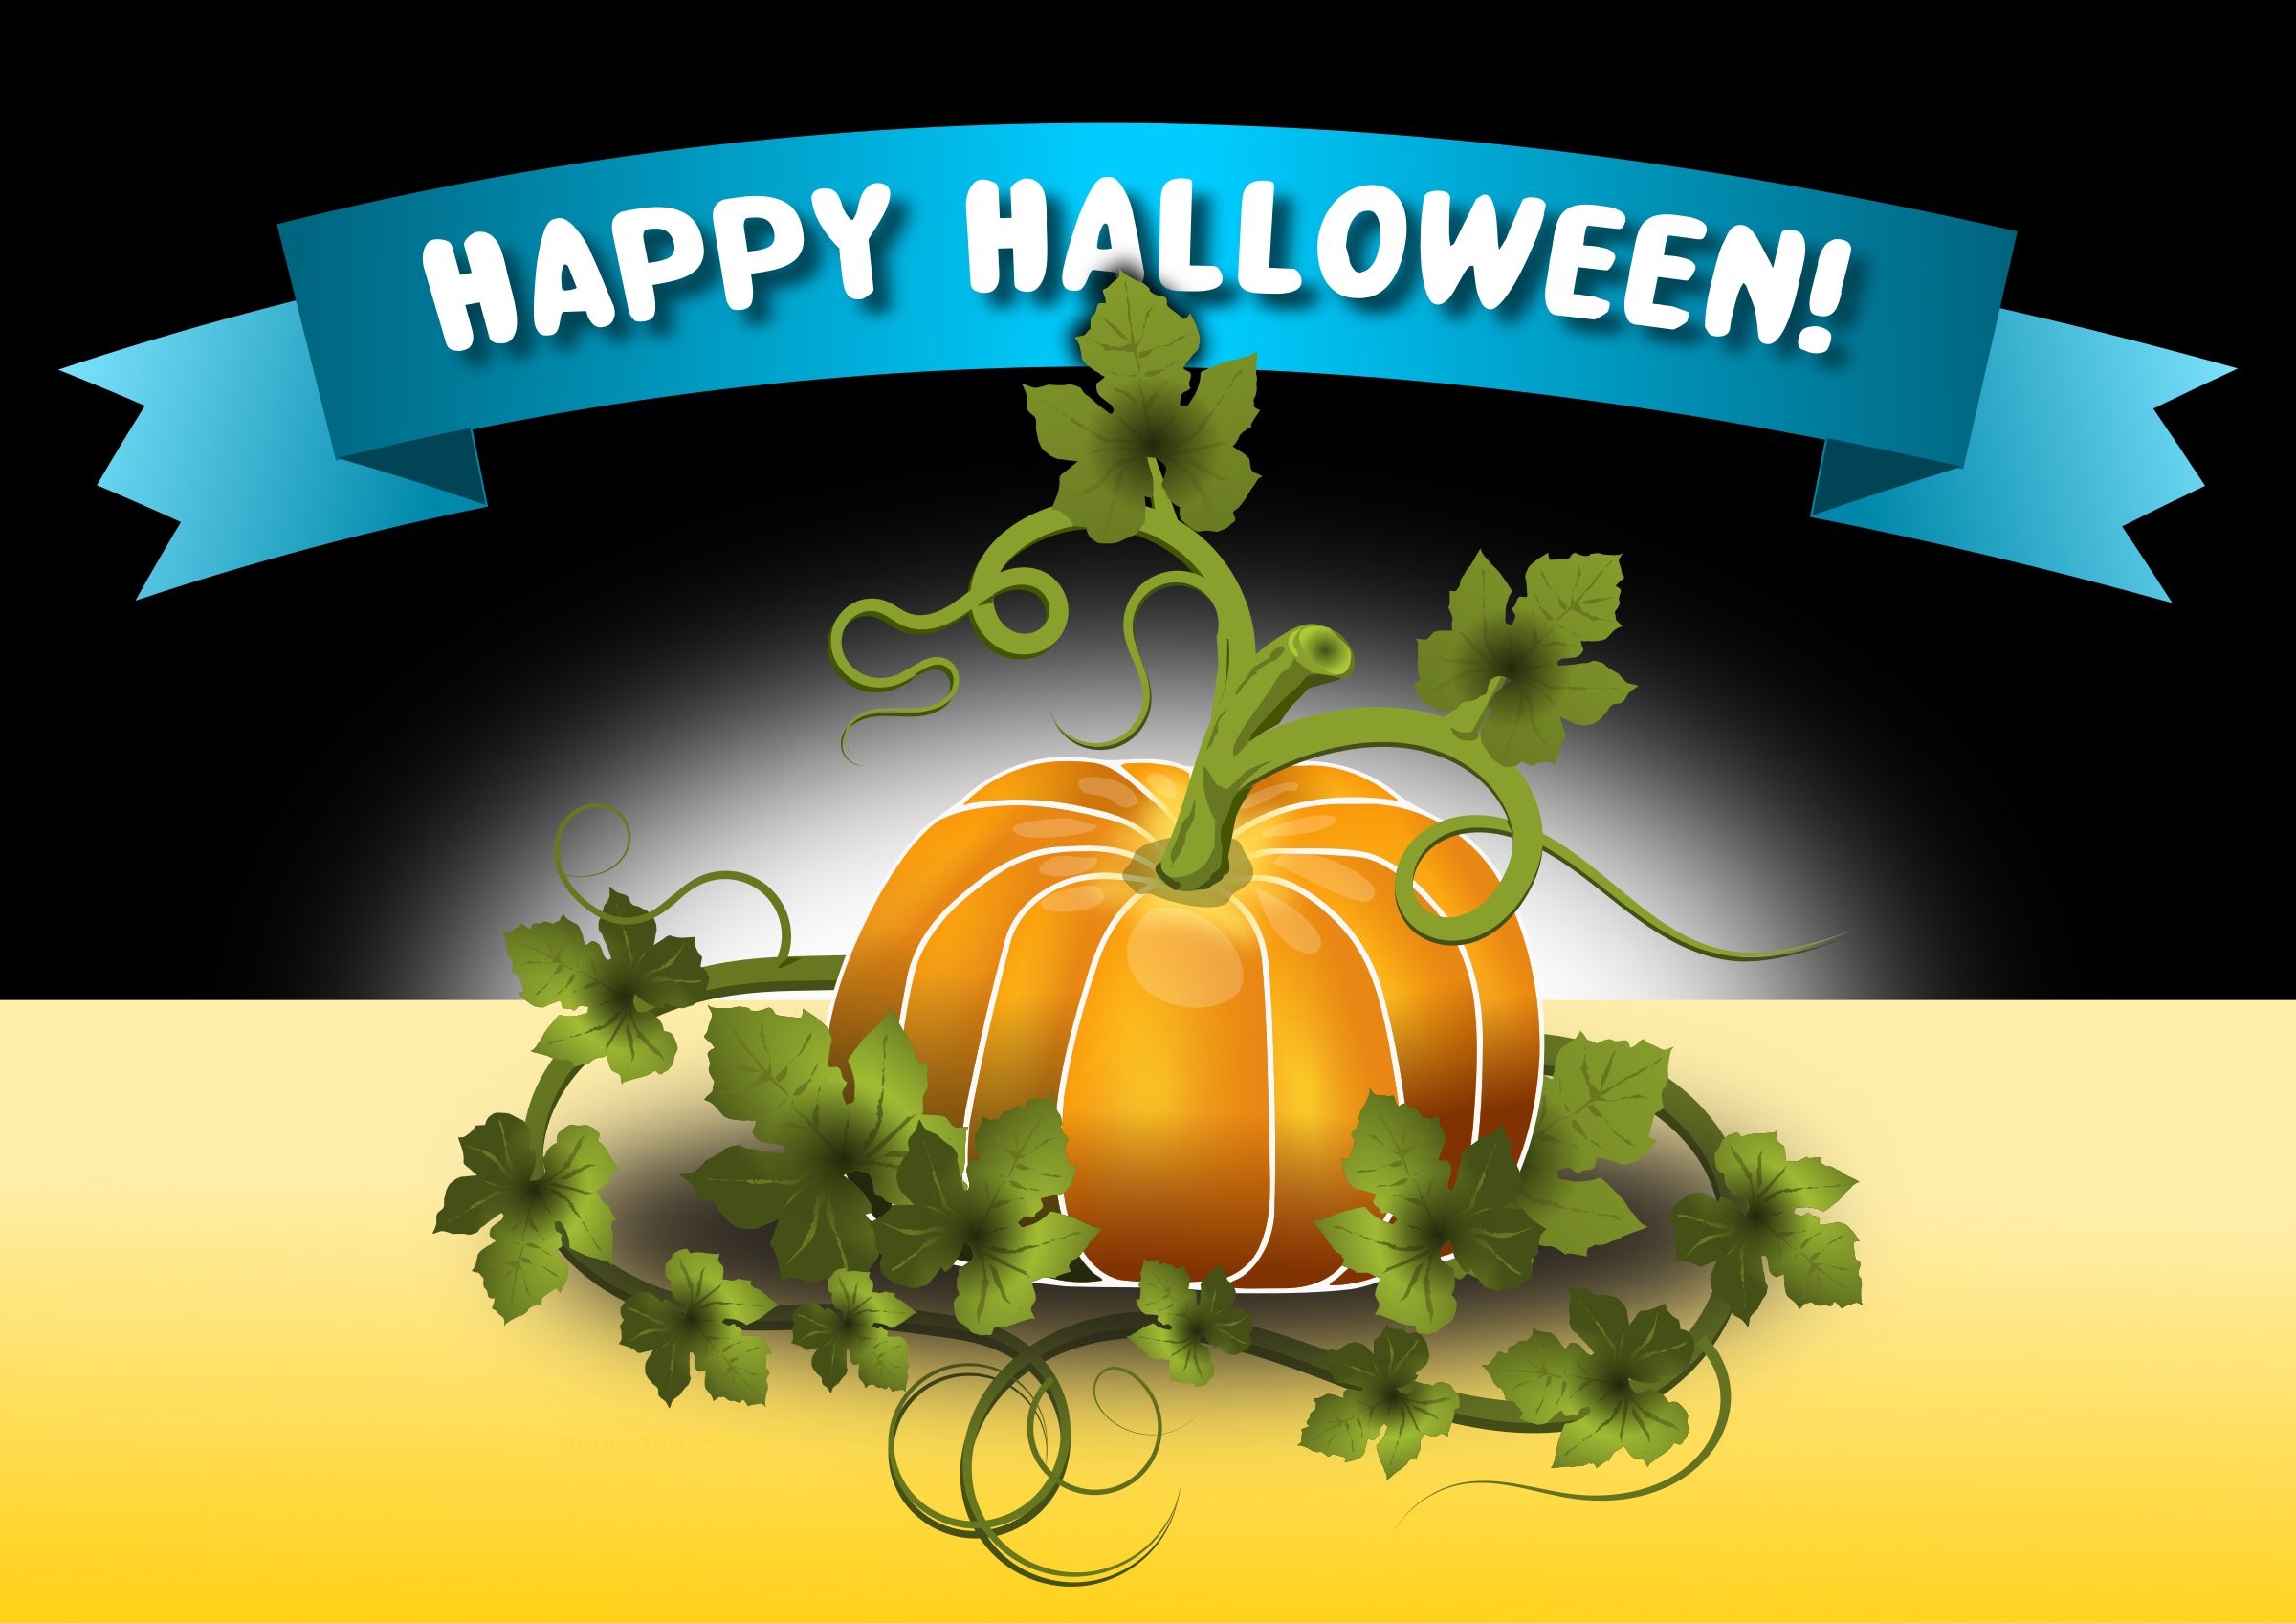 Happy Halloween Picture vector file image - Free stock ...